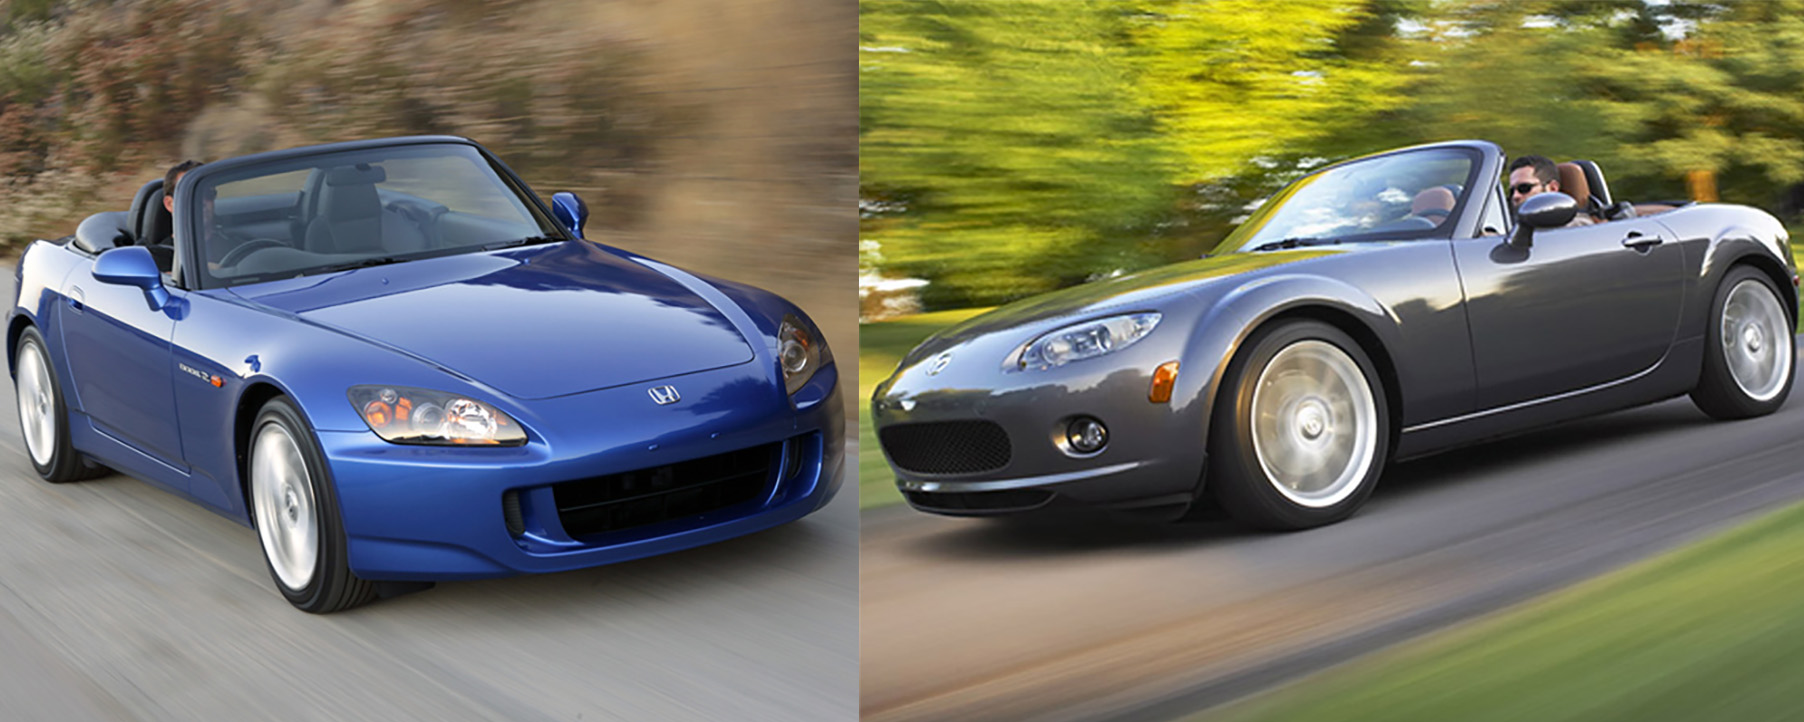 Side by side view of Blue Honda AP2 S2000 and Silver NA Mazda Miata driving down the road